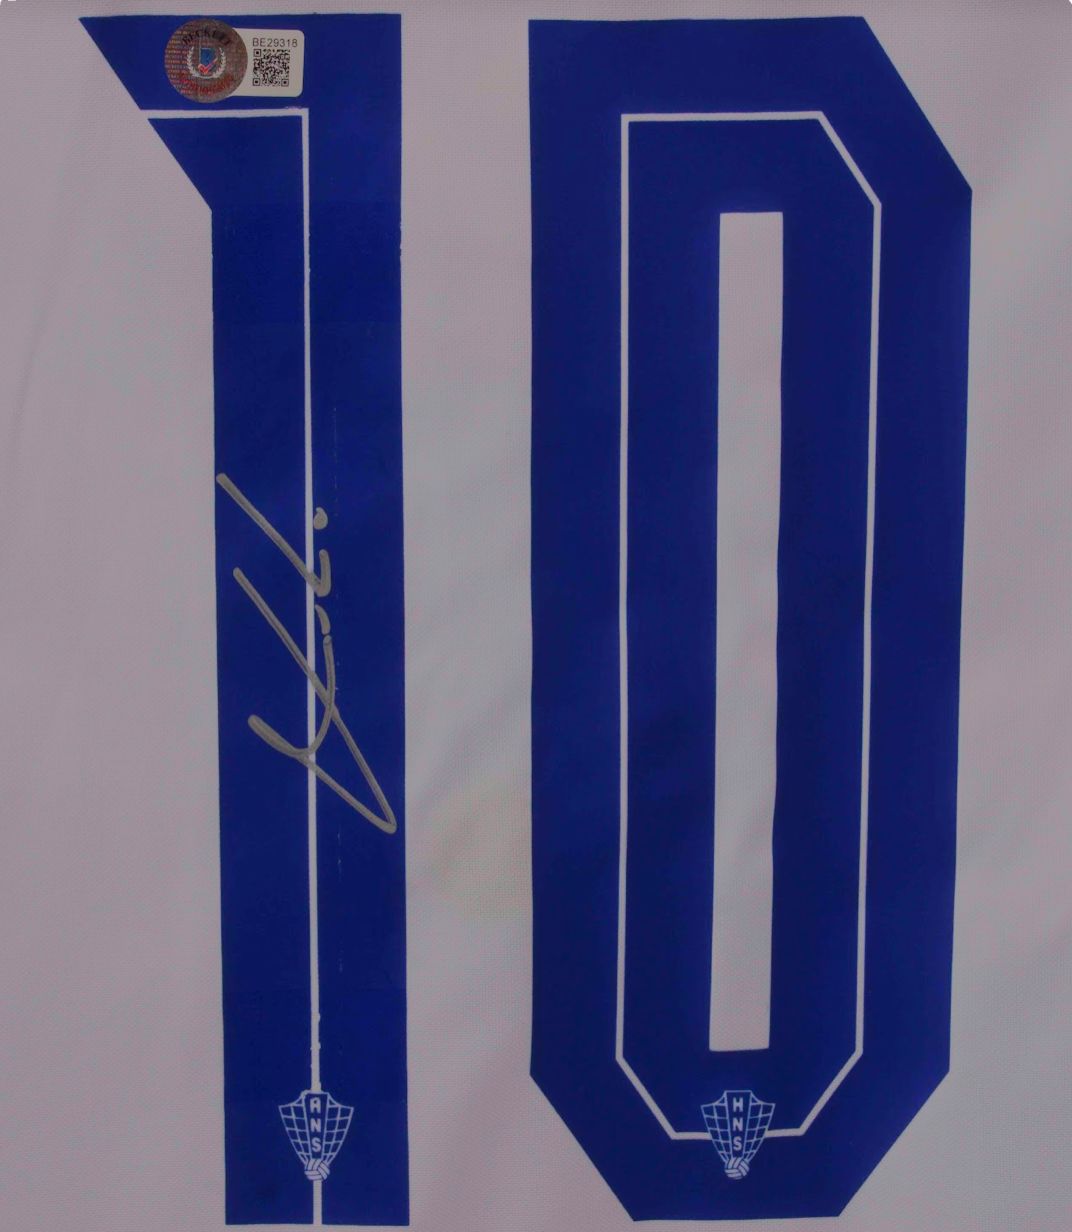 Luka Modric Autographed Croatia (Red and White #10) Soccer Jersey - BAS